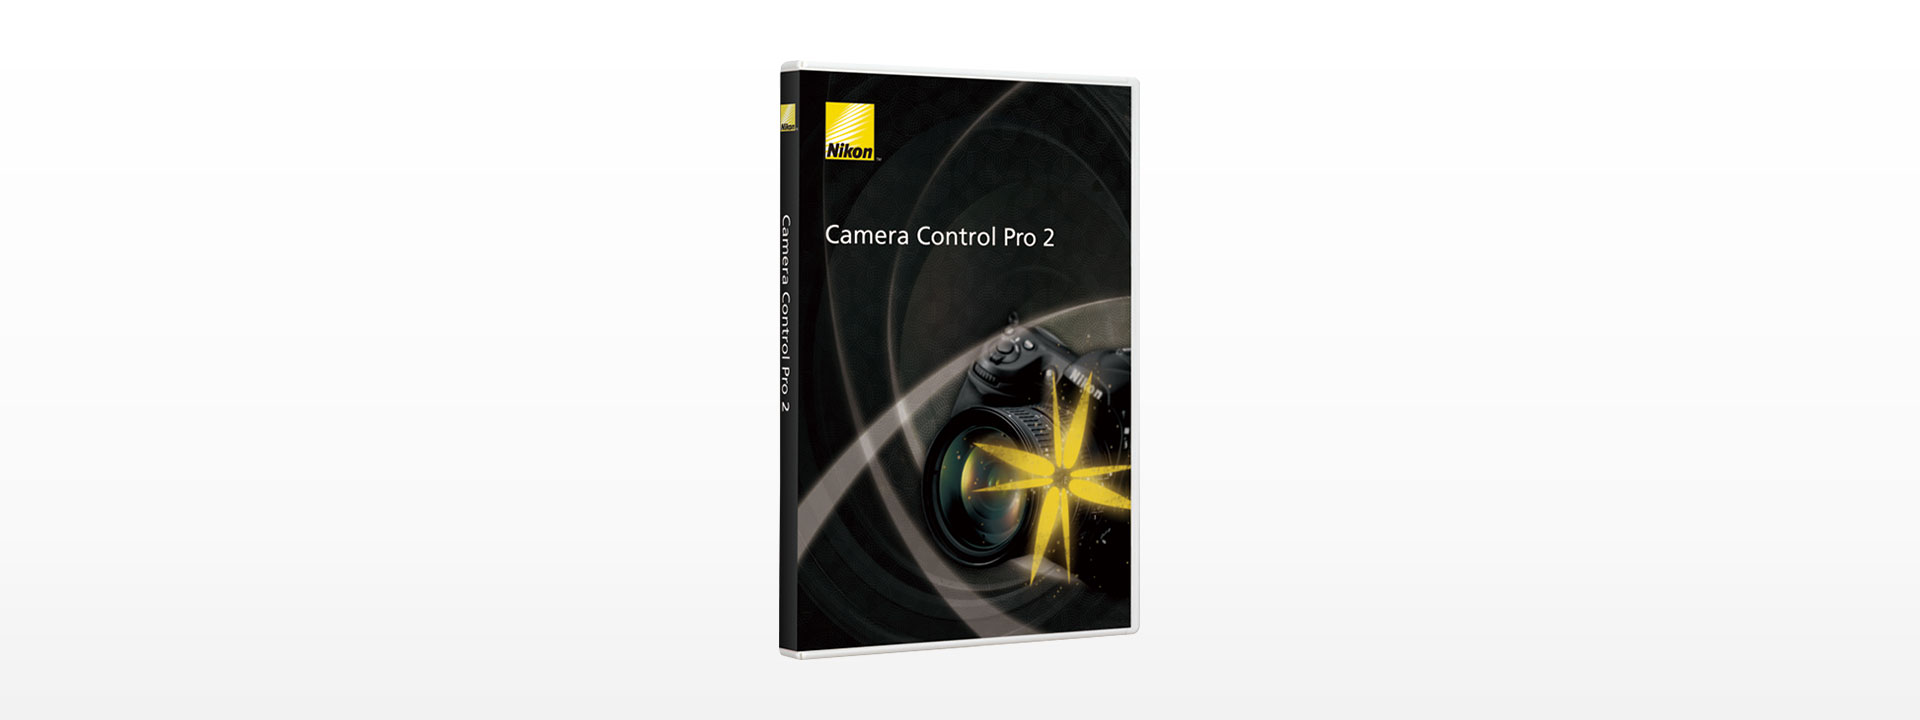 Camera Control Pro 2 - 概要 | ソフトウェア・アプリ | ニコン 